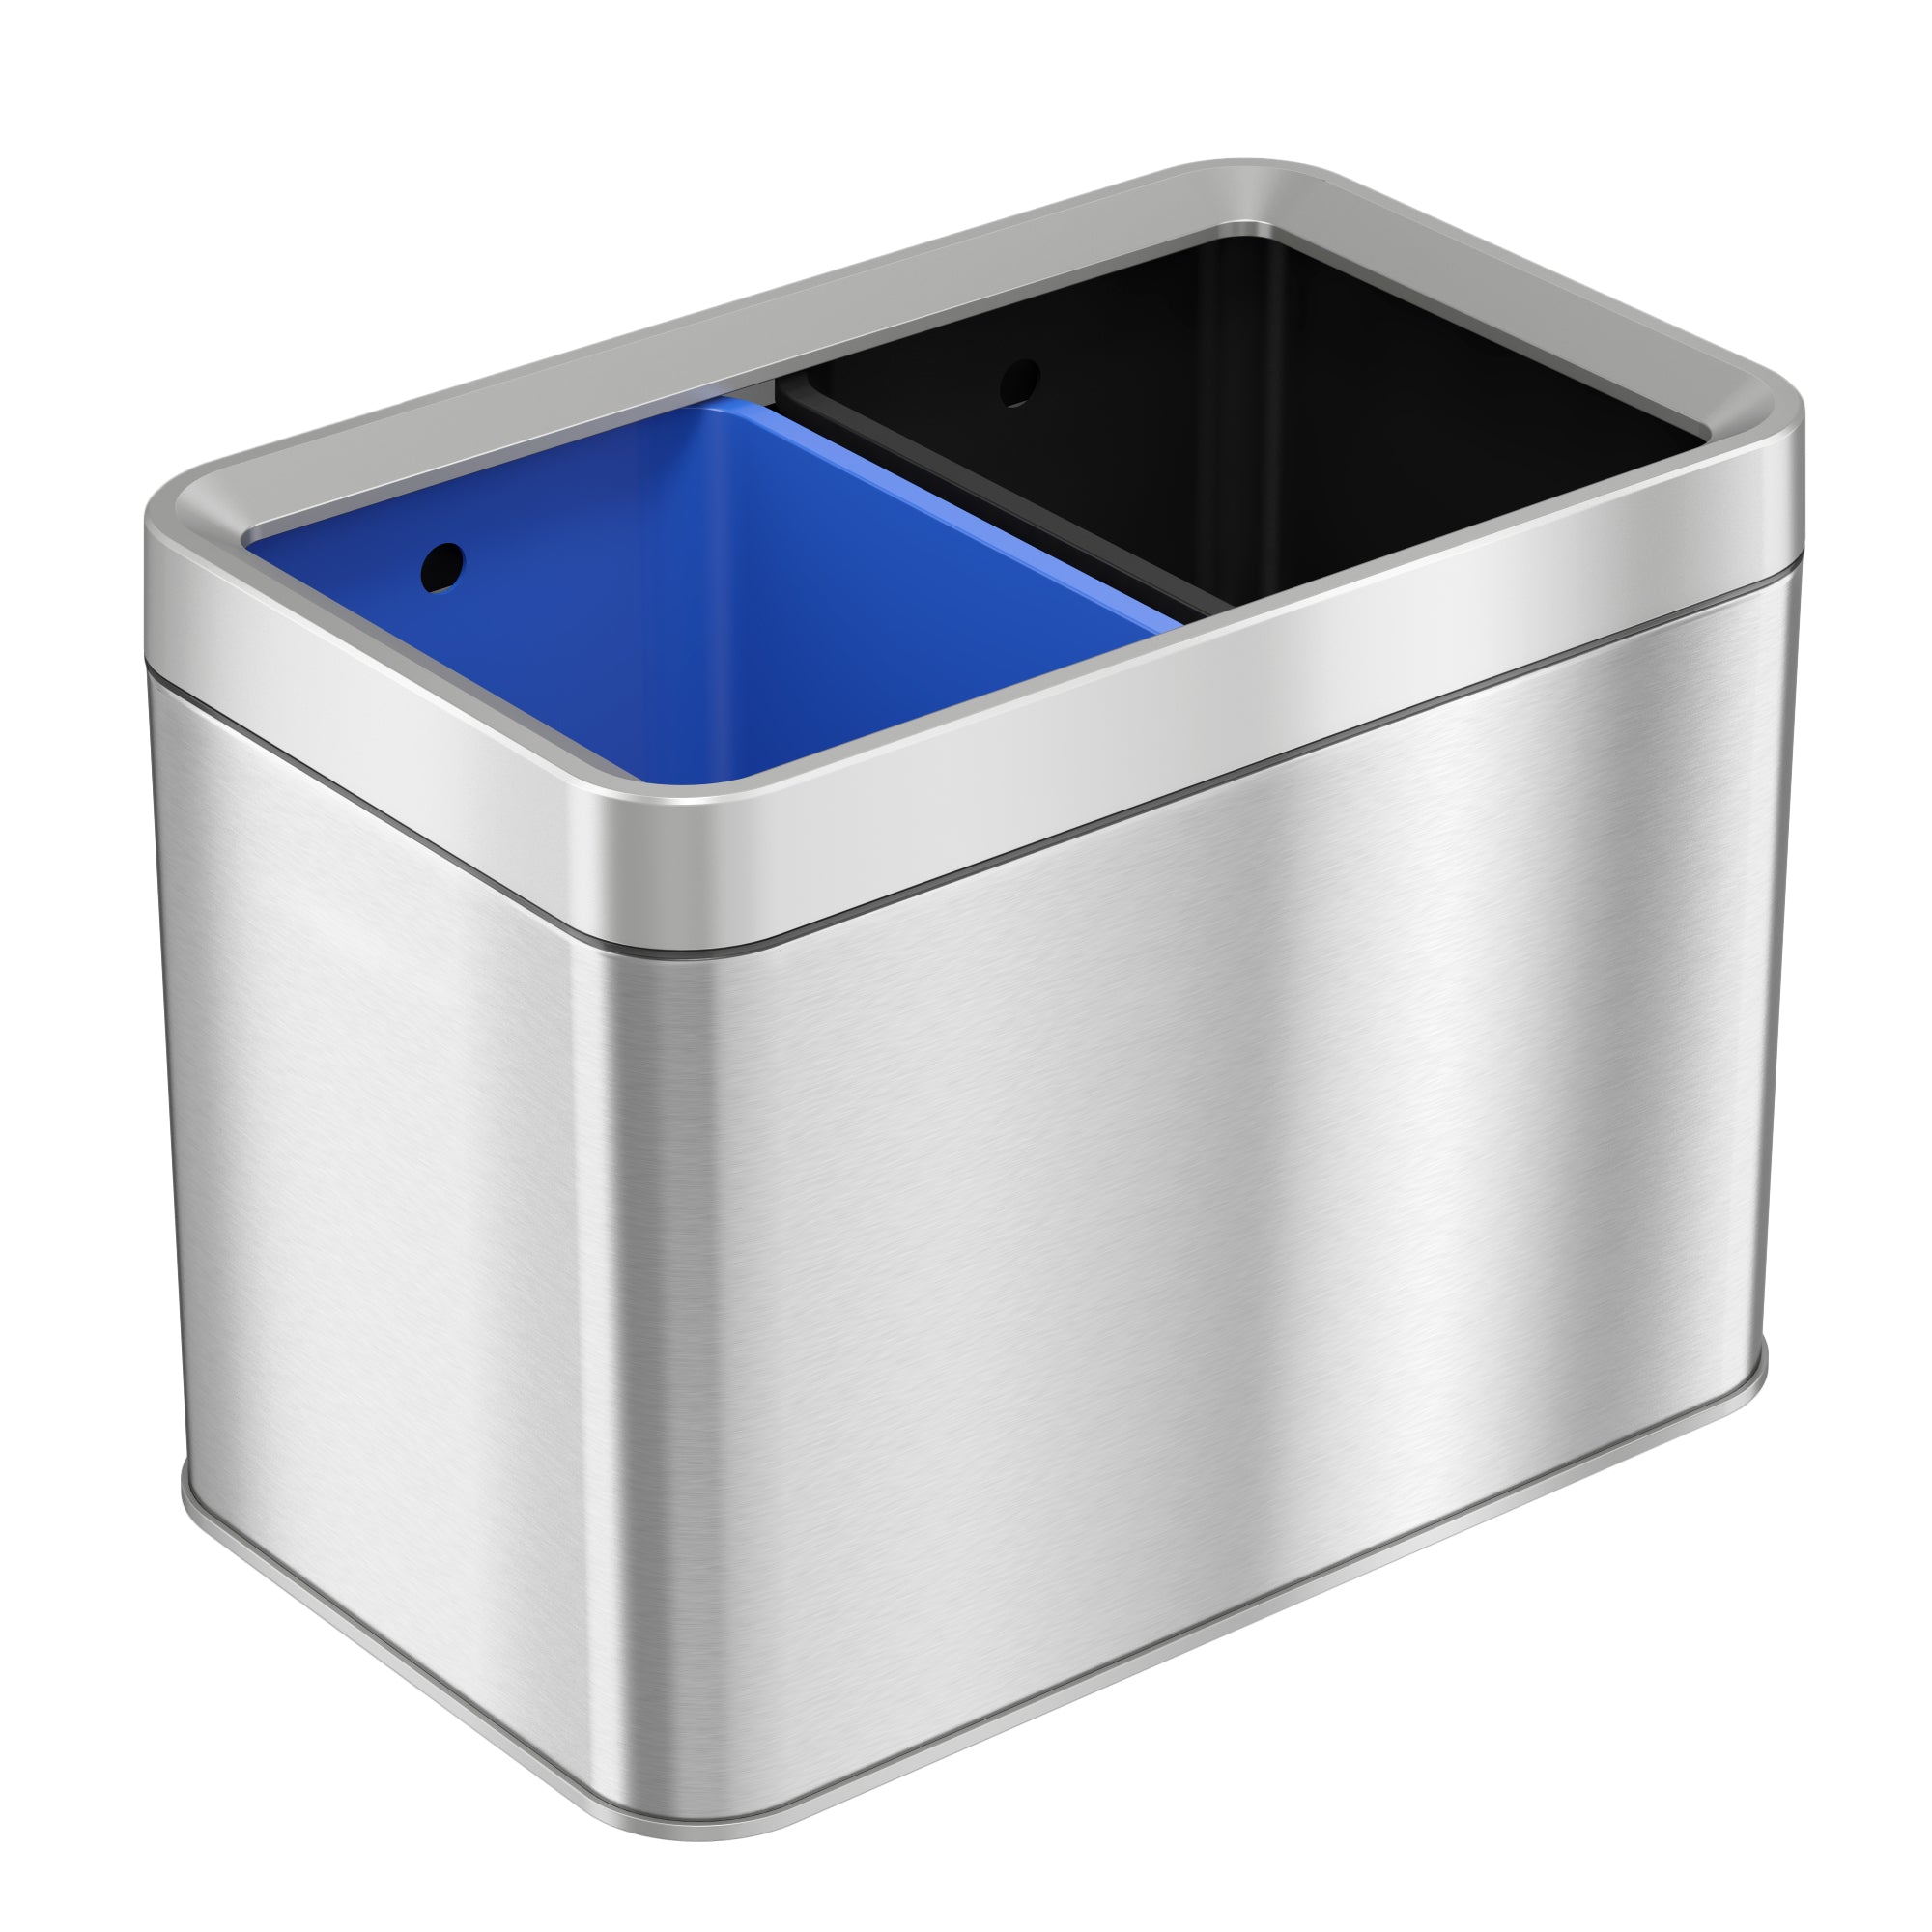 23 Gallon / 87 Liter Semi-Round Open Top Trash Can – iTouchless Housewares  and Products Inc.